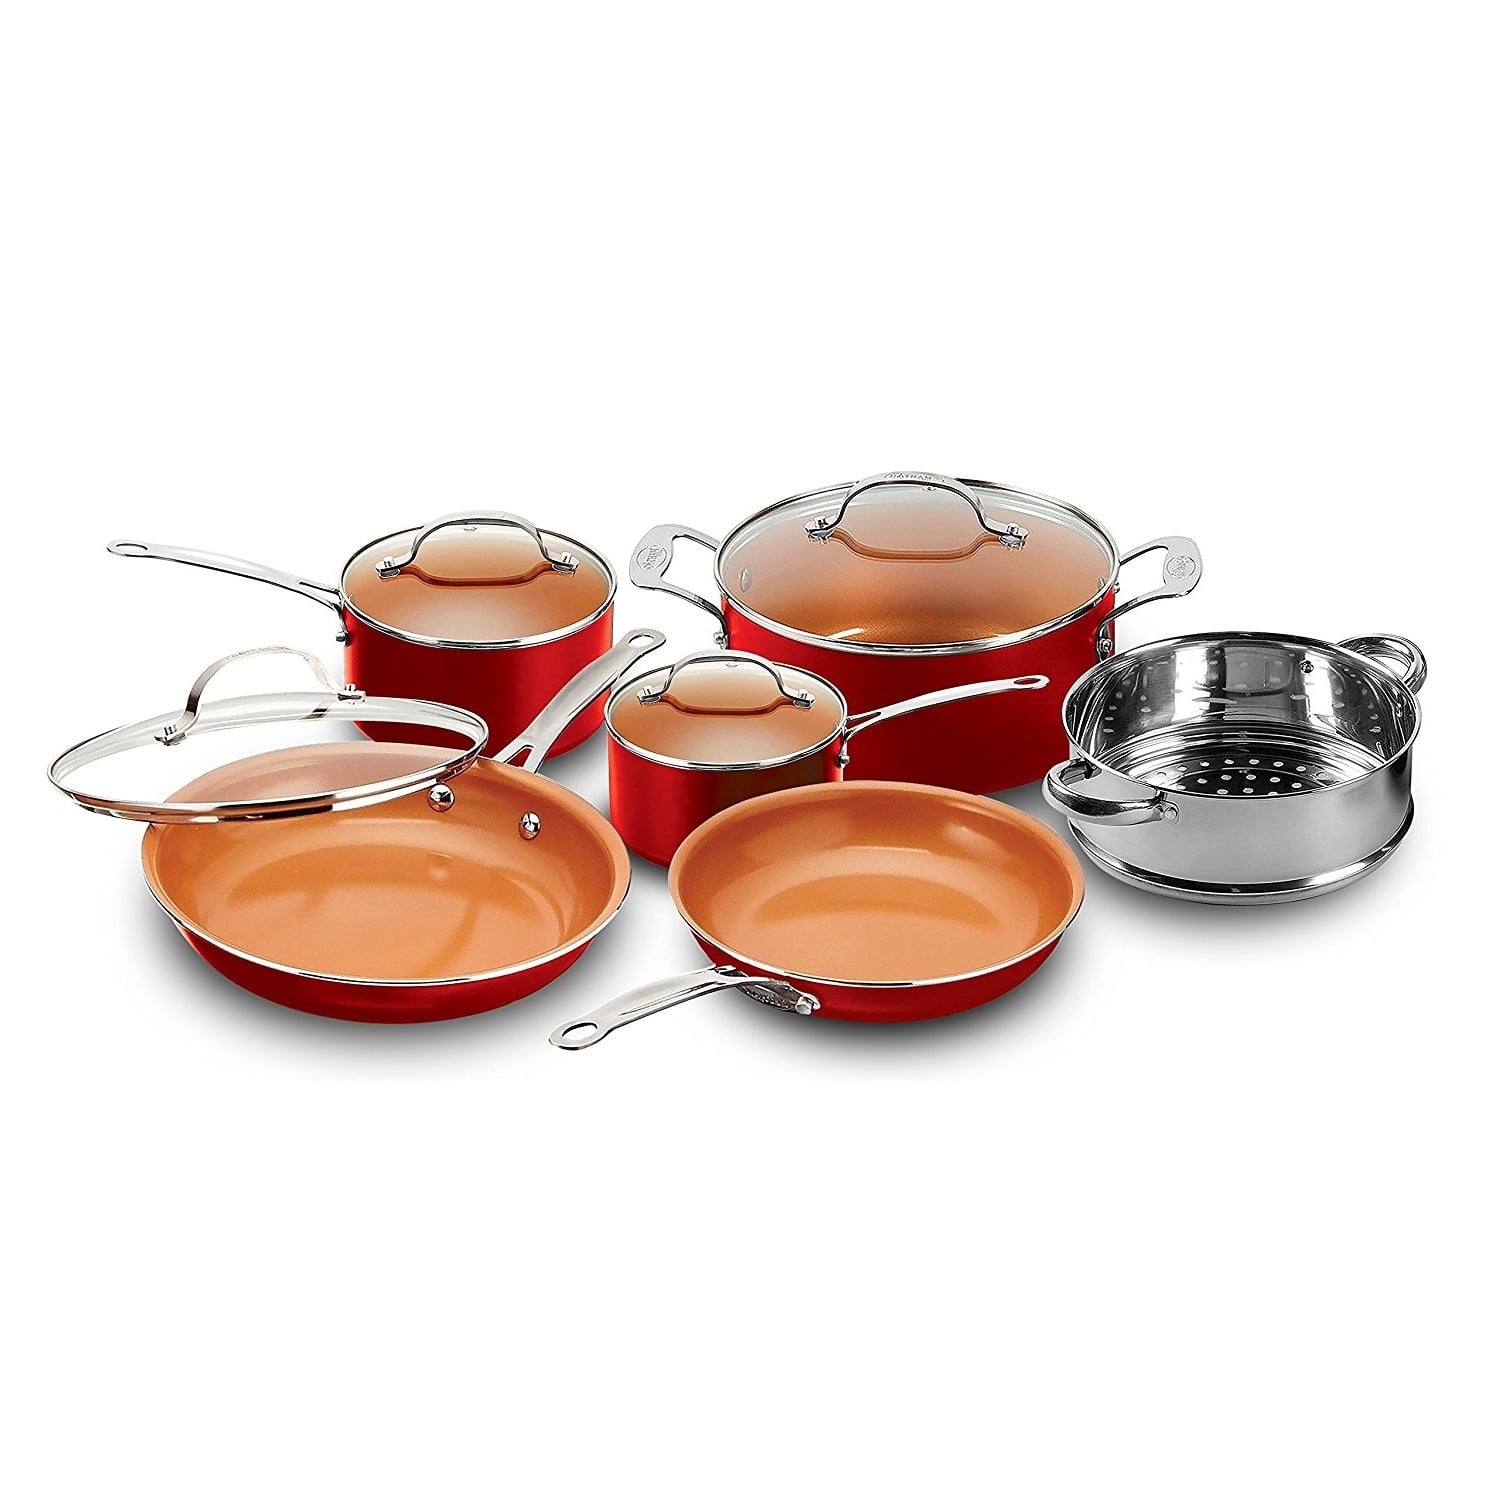 Premium Ceramic Cookware with Triple Coated Gotham Steel Pots and Pans Set 